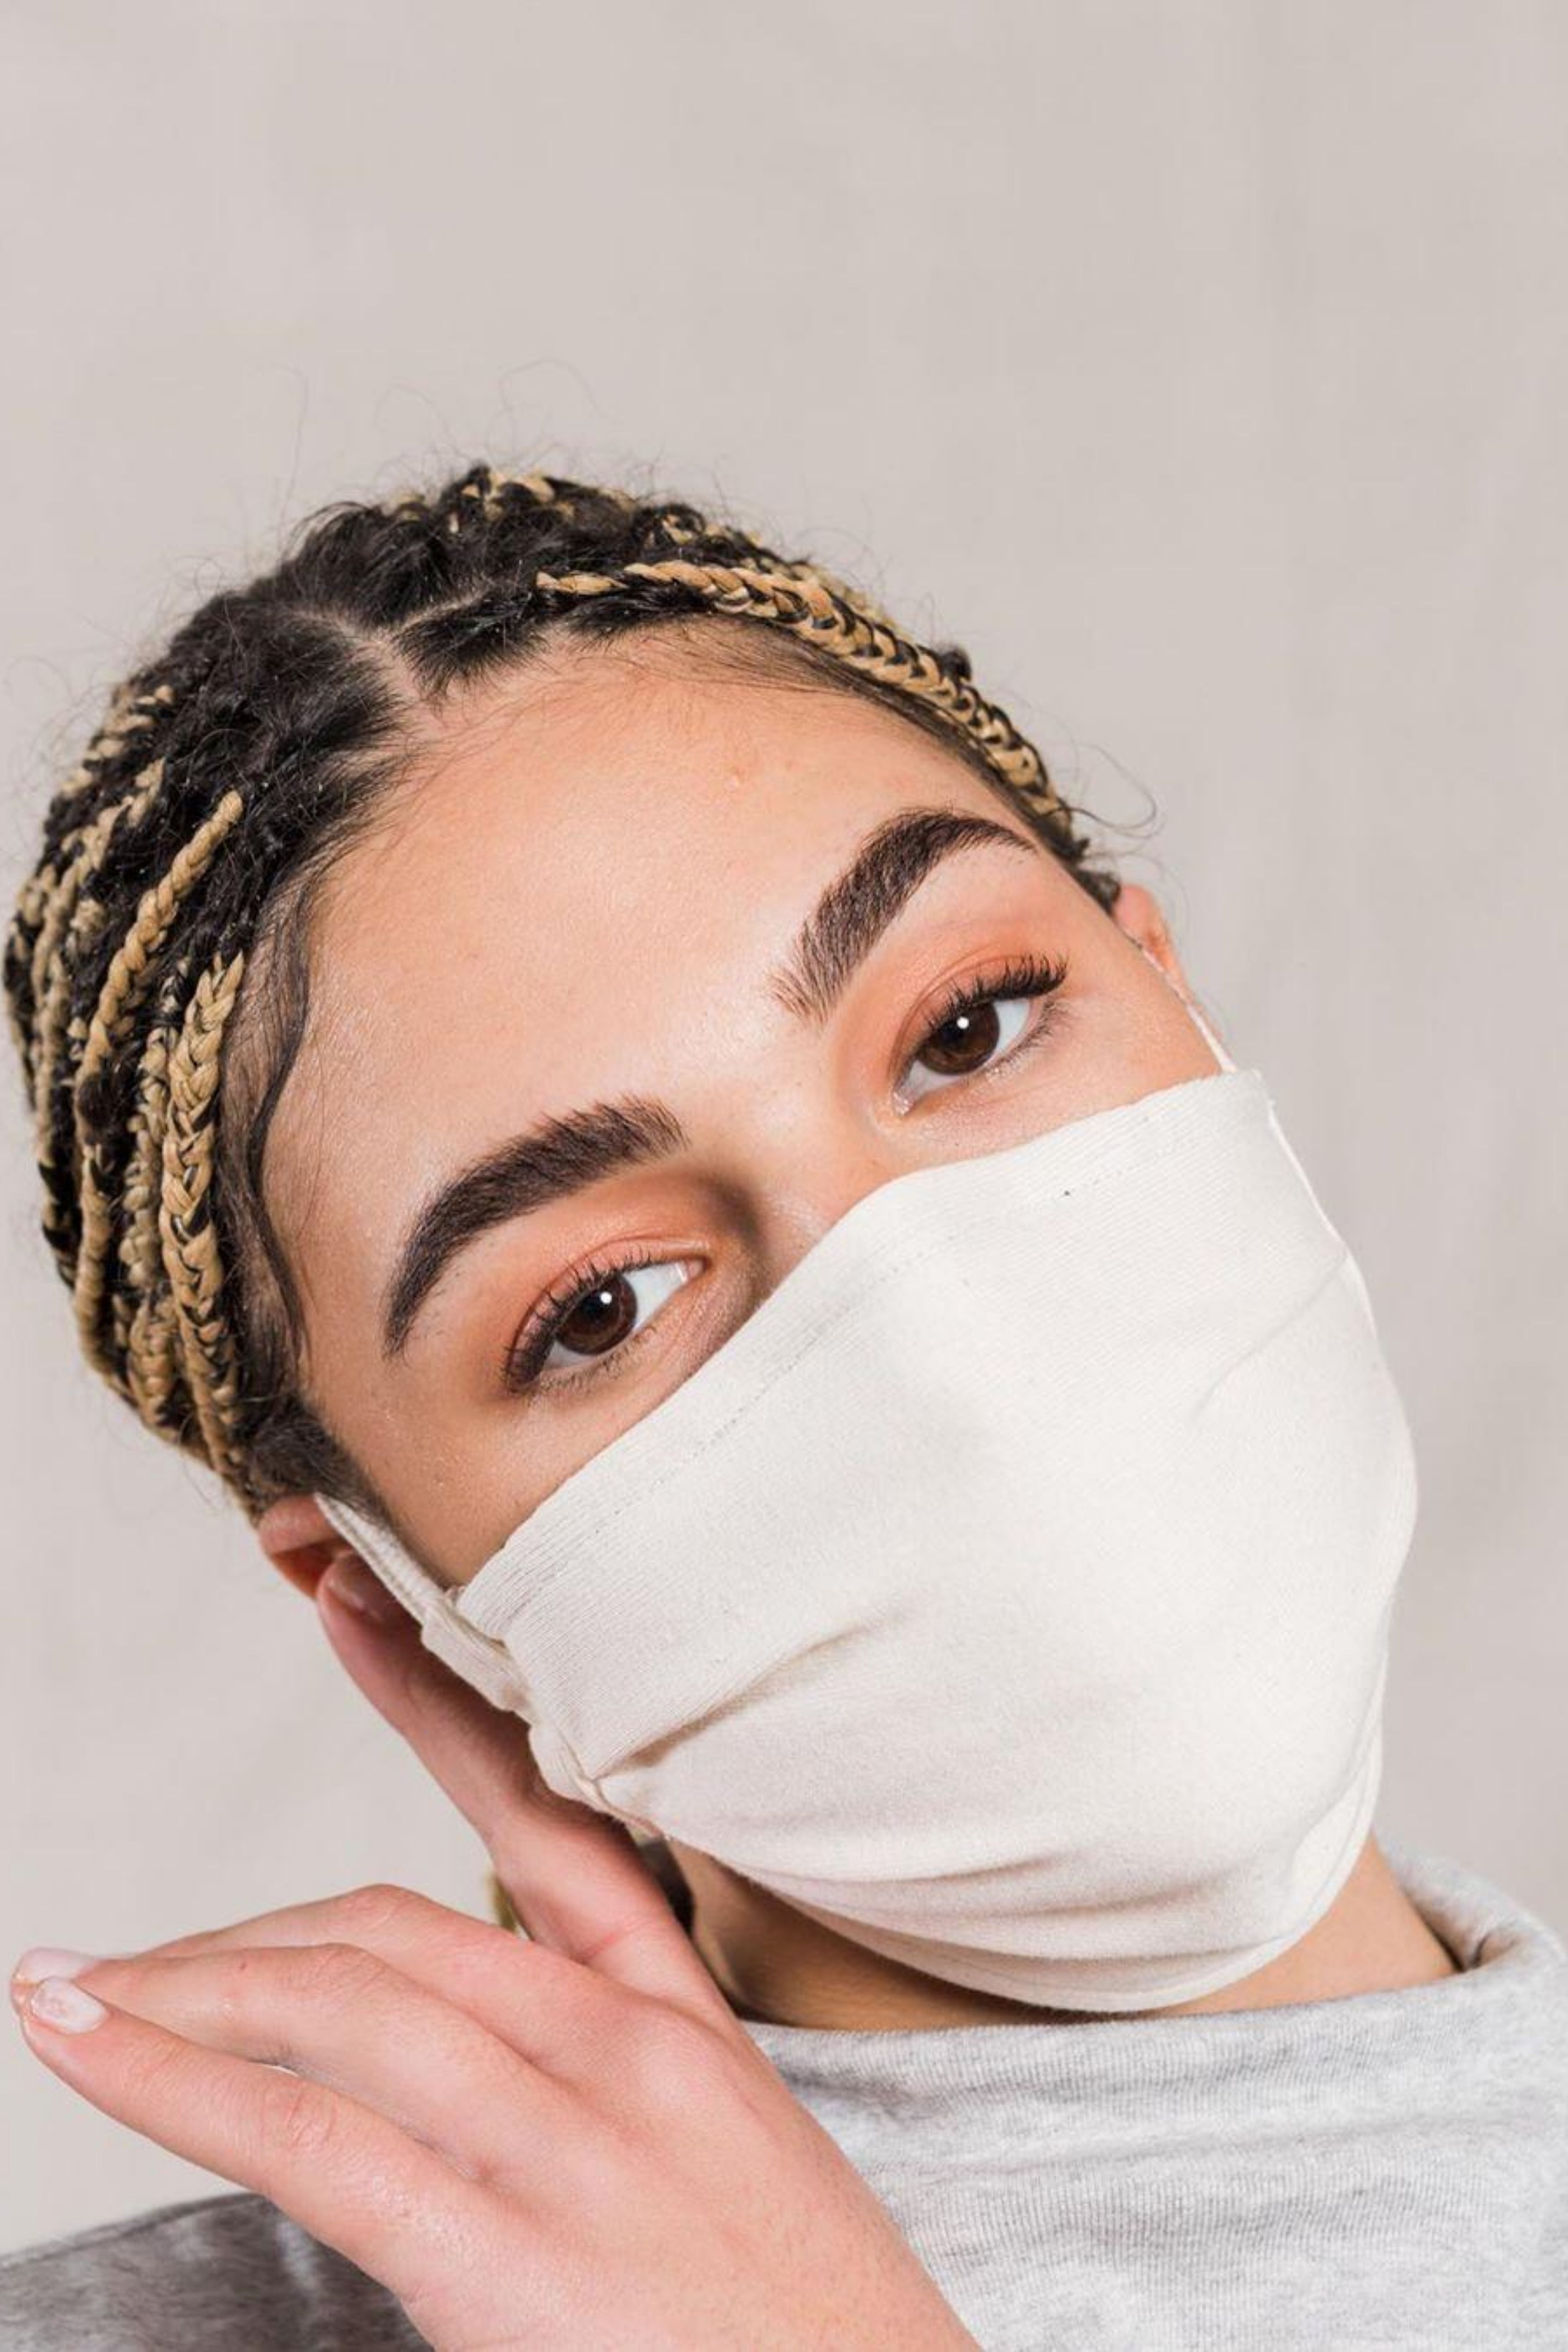 Because this decade hasn’t been weird enough, here are 33 ethical face masks (that are surprisingly chic).